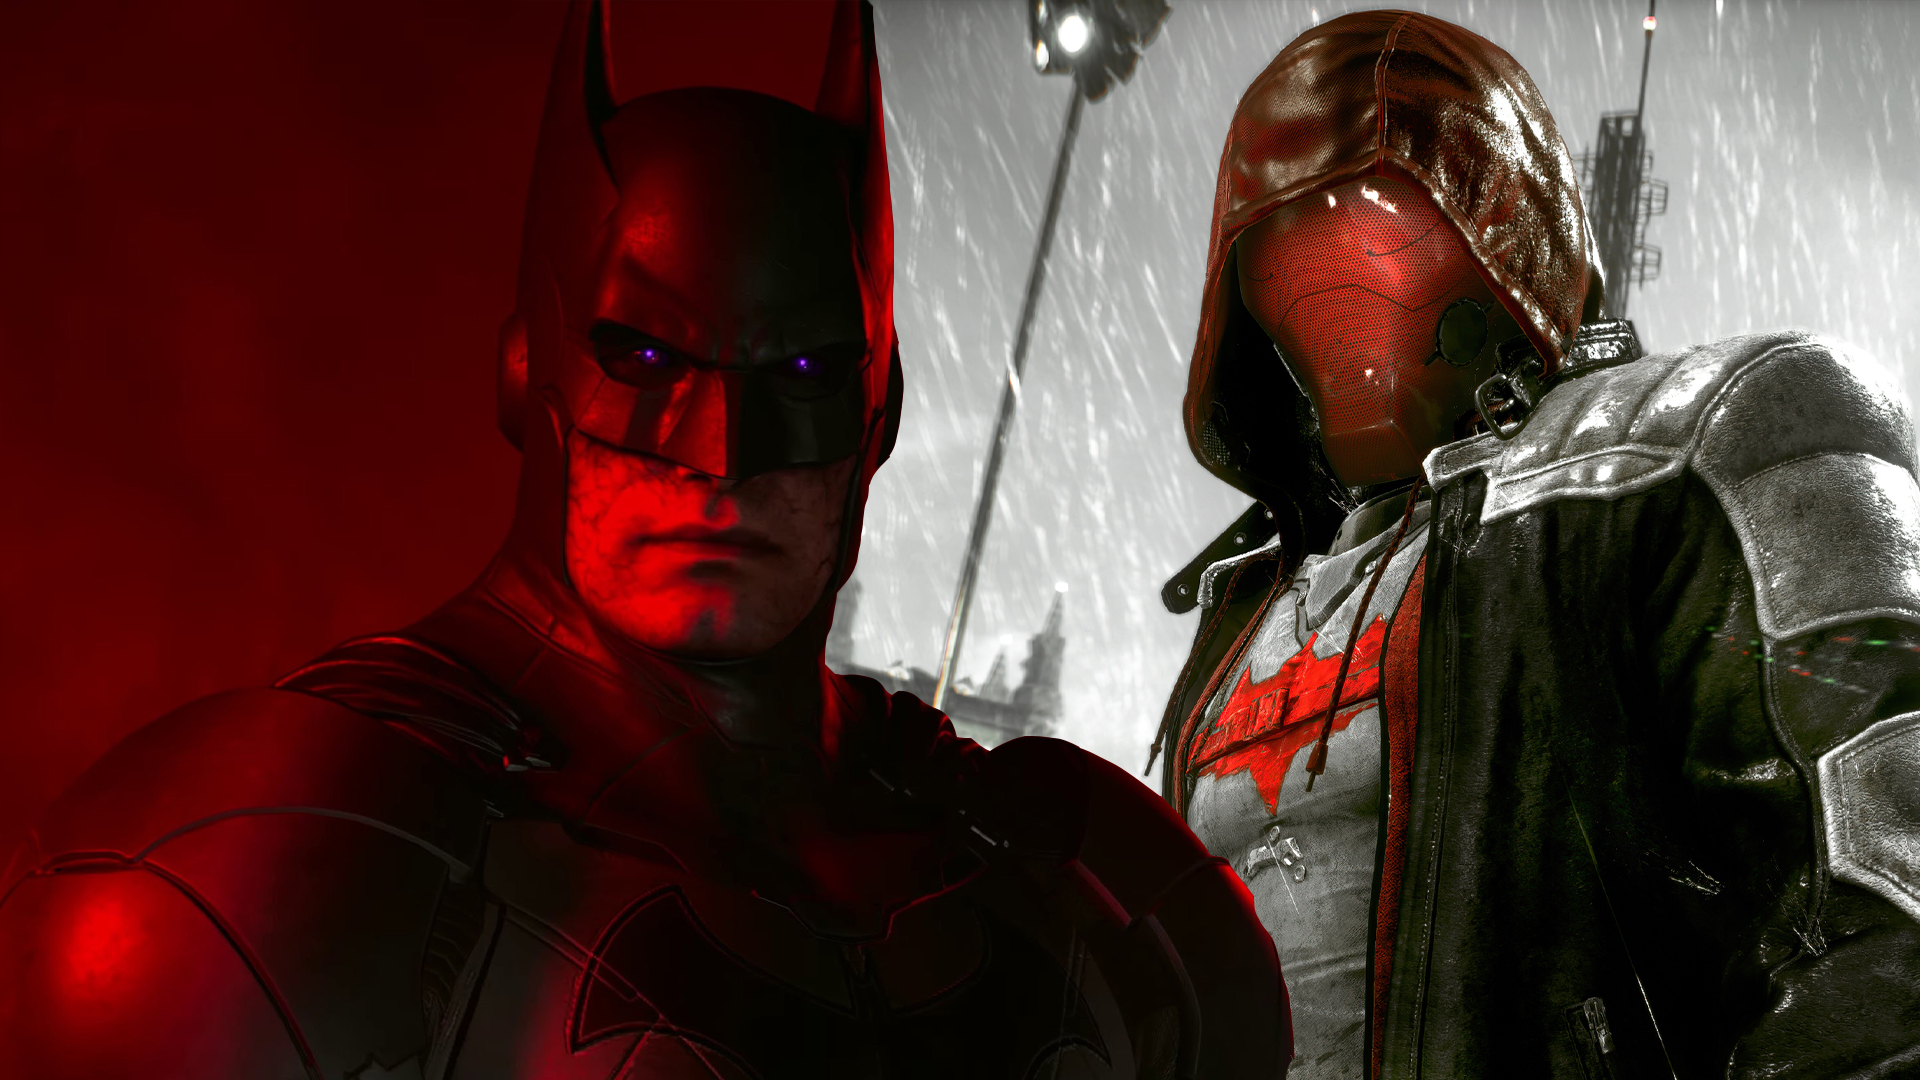 Suicide Squad game may have planted a Red Hood tease in plain sight